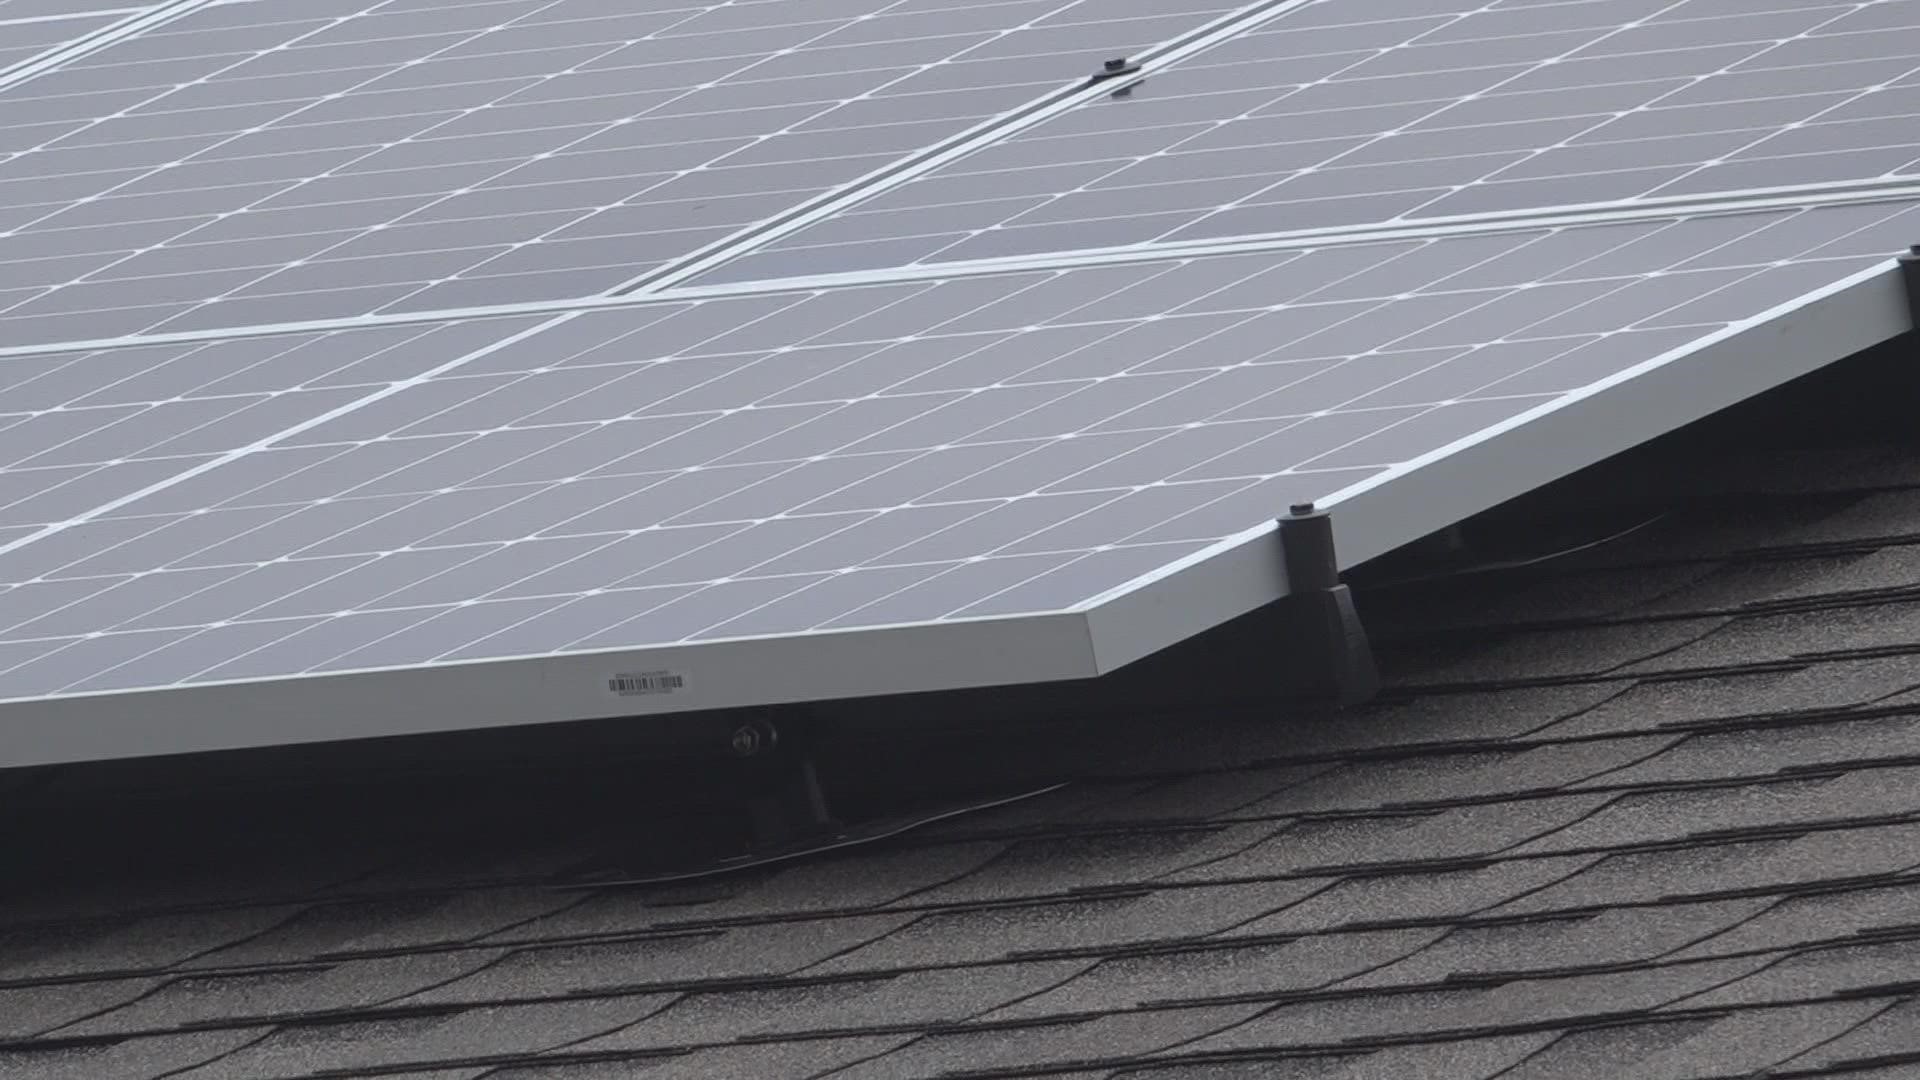 One customer said her solar panels failed inspection five times. Solis Energy responds to customer complaints.